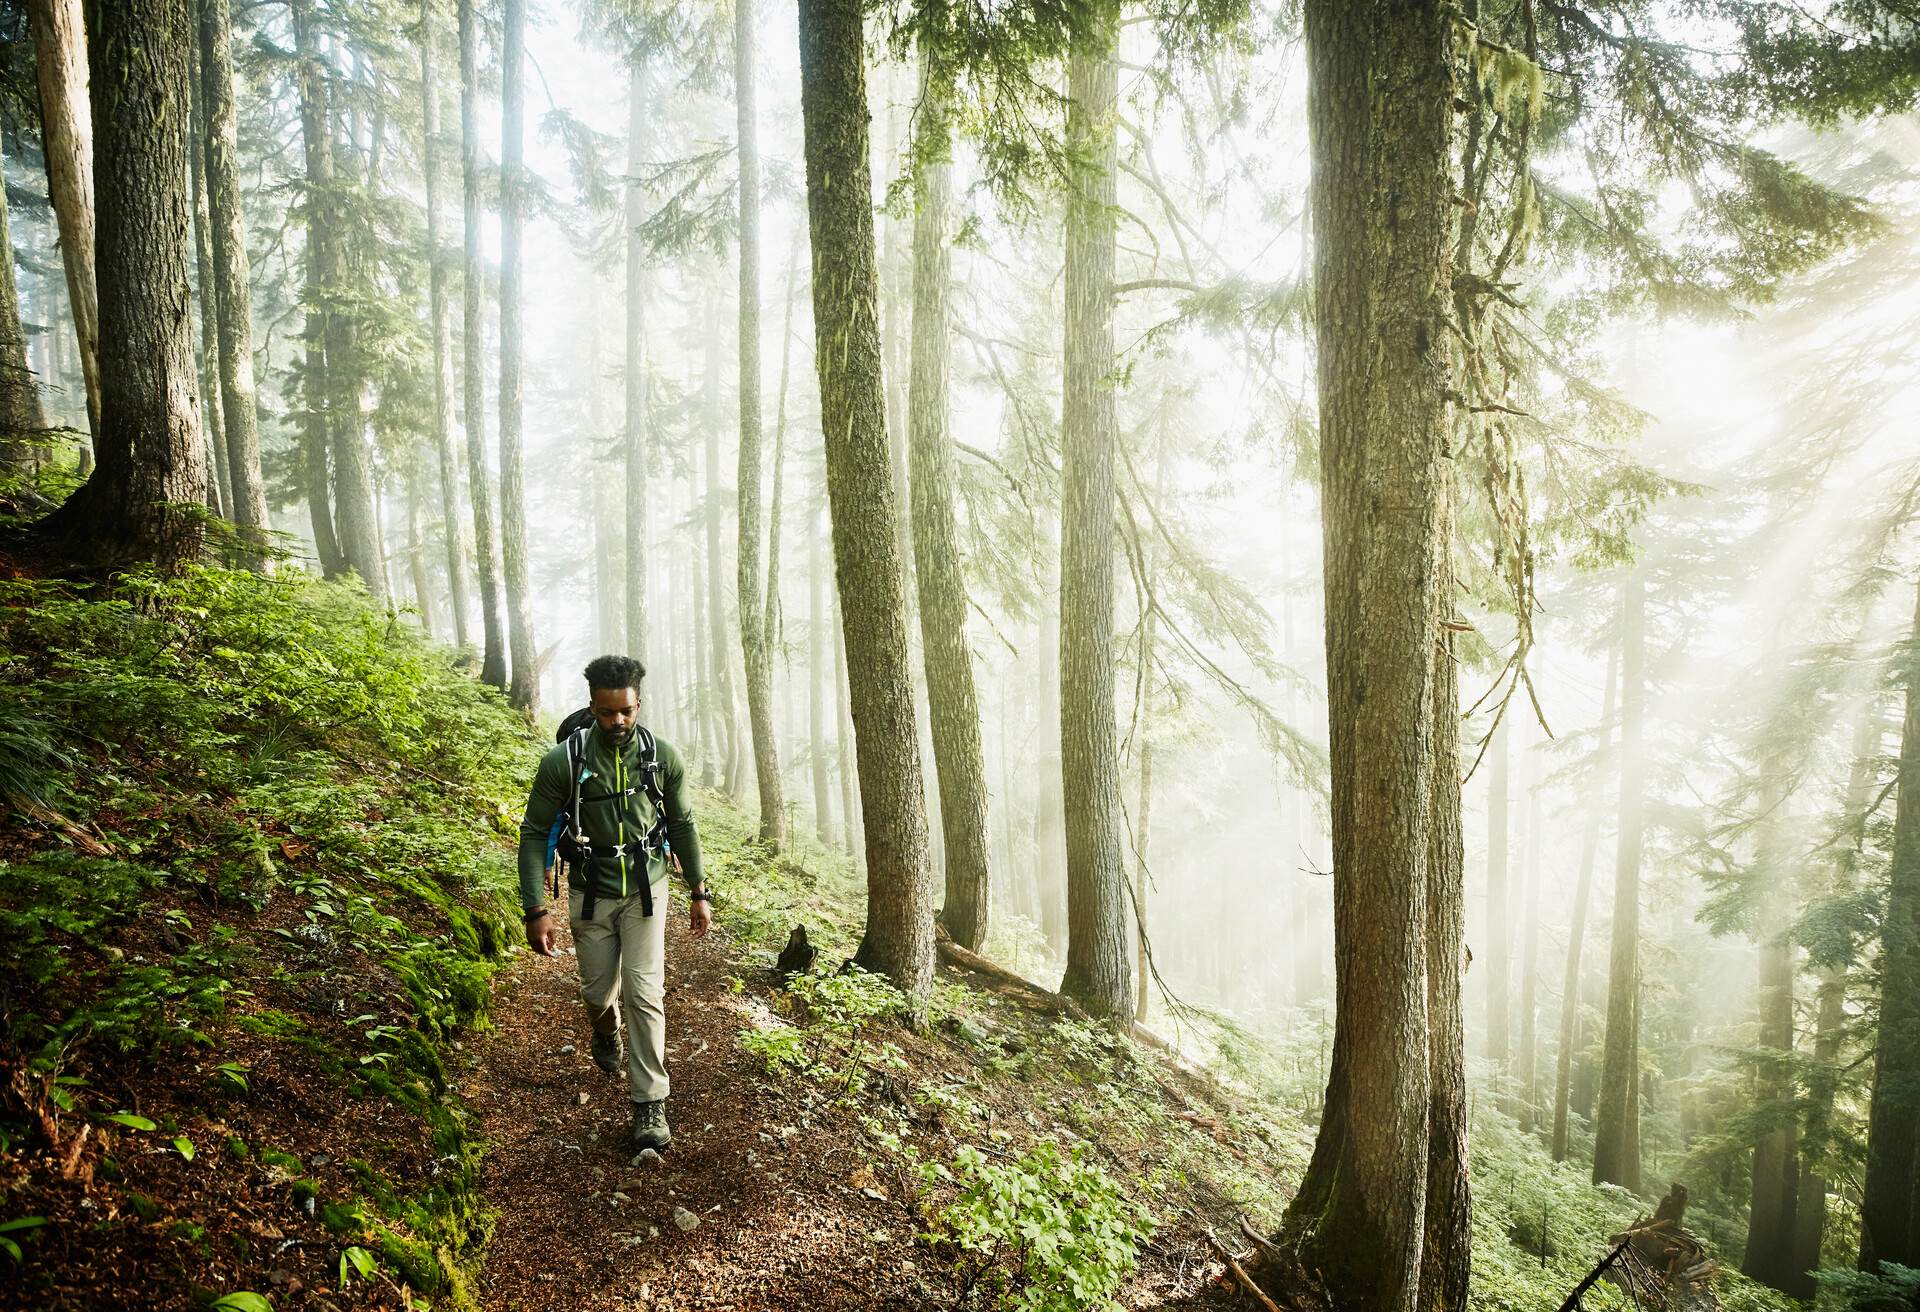 THEME_HIKE_MAN_PERSON_FOREST_WOODS_TRAIL_GettyImages-1056062042